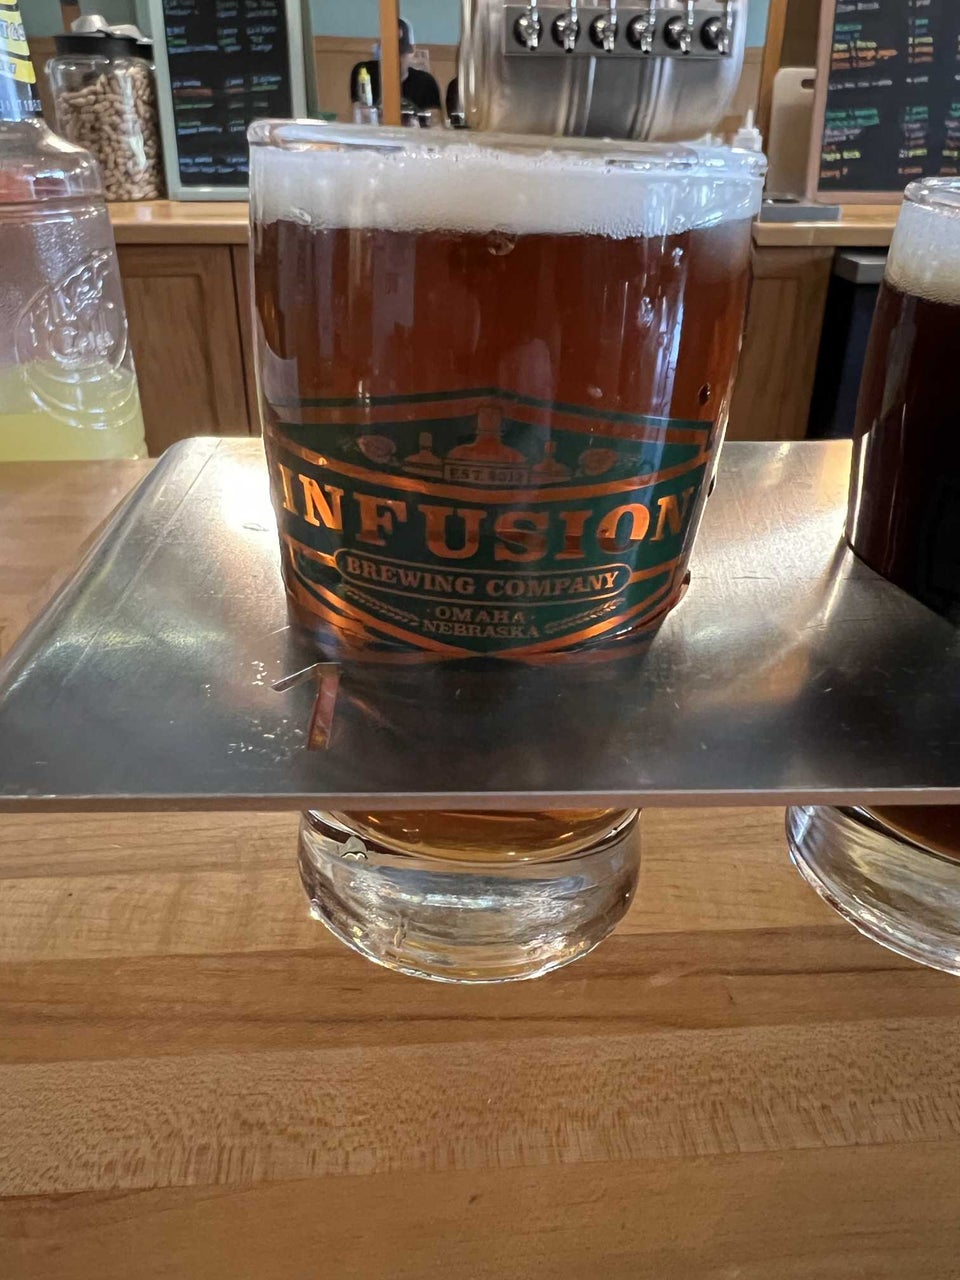 Infusion Brewing Company